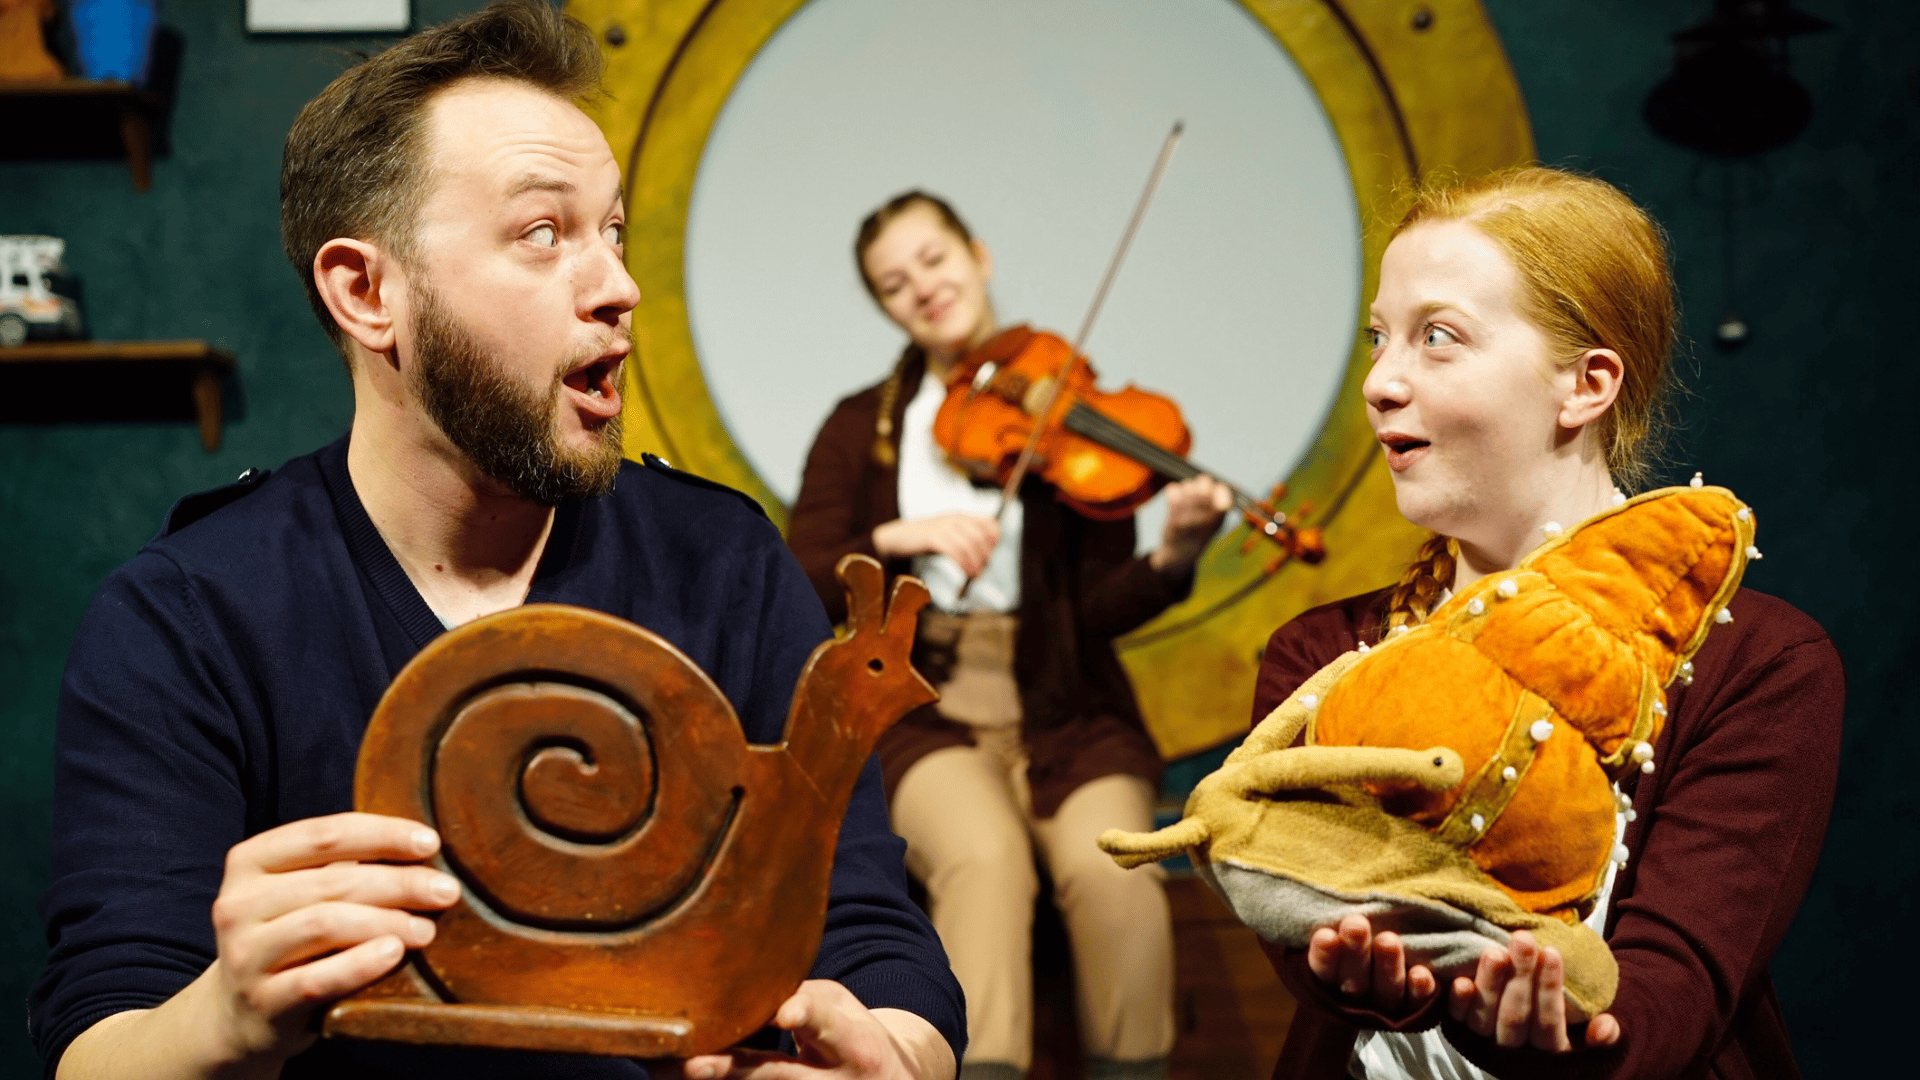 A man holding a wooden snail faces a girl holding a soft toy sea snail. In the background a female violinist plays in front of a large porthole.